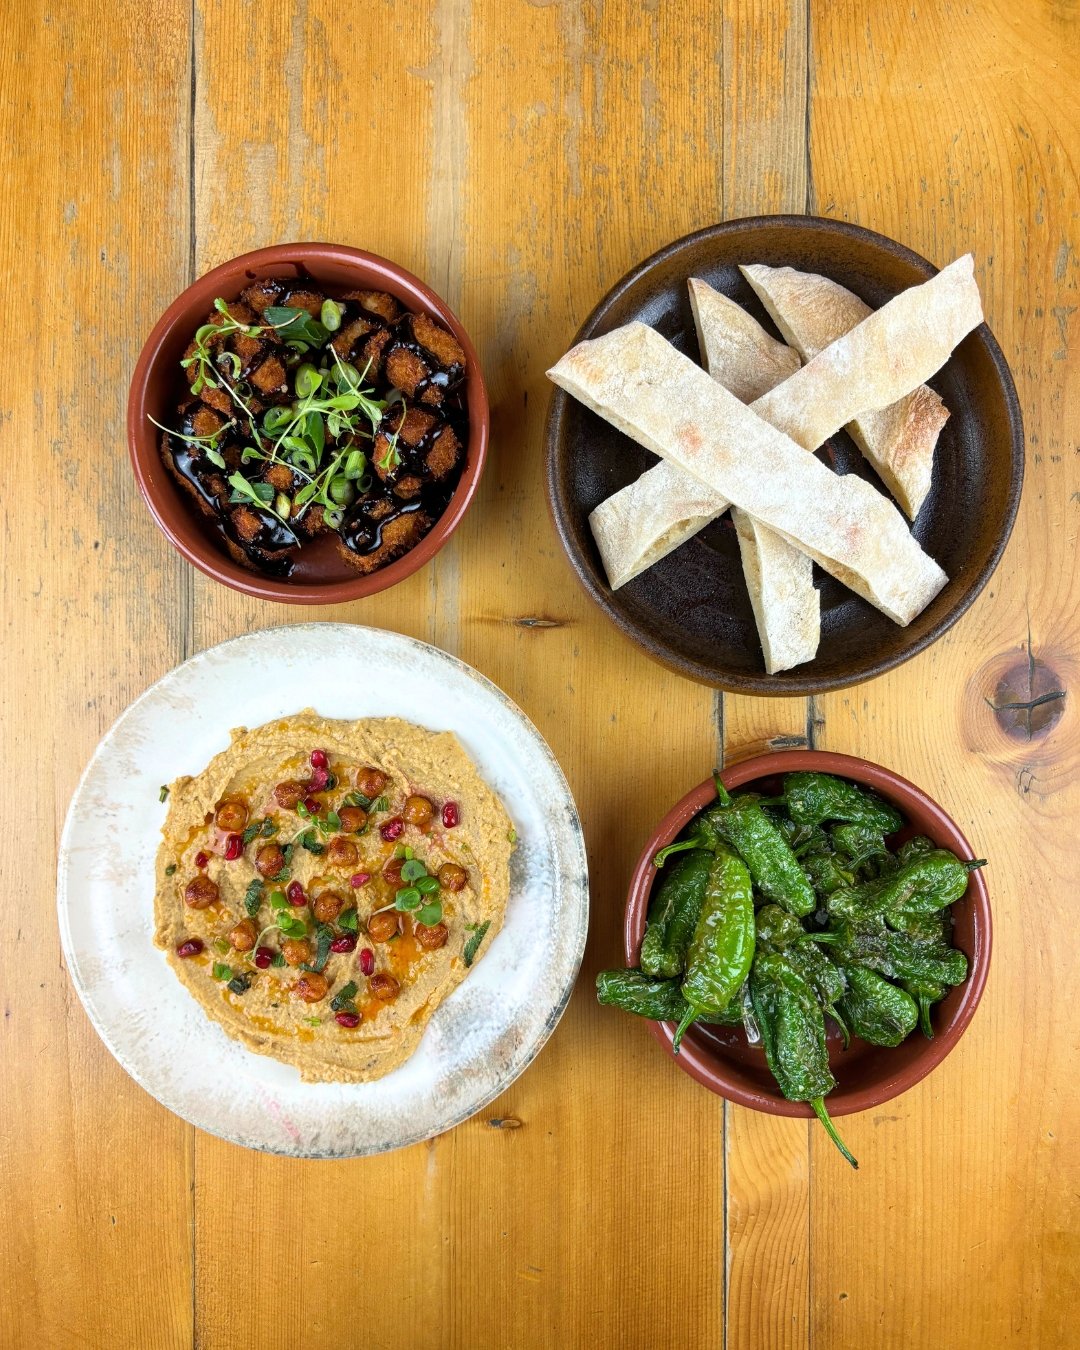 Nibbles 😋

- Hummus, spiced chickpeas, mint, pomegranate &amp; flatbread (V)
- Padron peppers (VE)
- Breaded pork belly bites, soy &amp; honey dip

🍲 Check out our menu and book a table (links in bio)